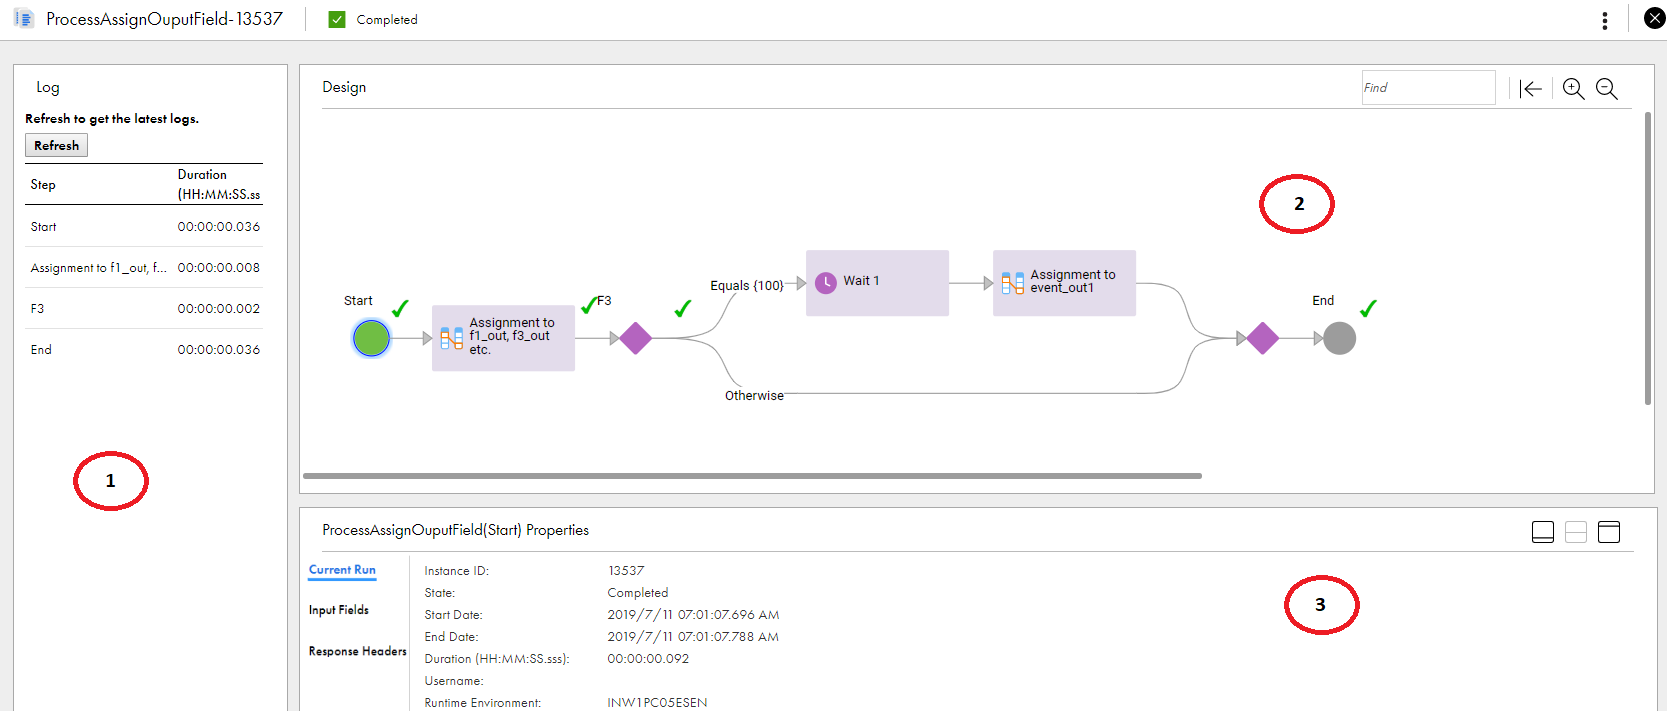 The image shows a sample Process View Detail page for a process created using Application Integration. 
		  